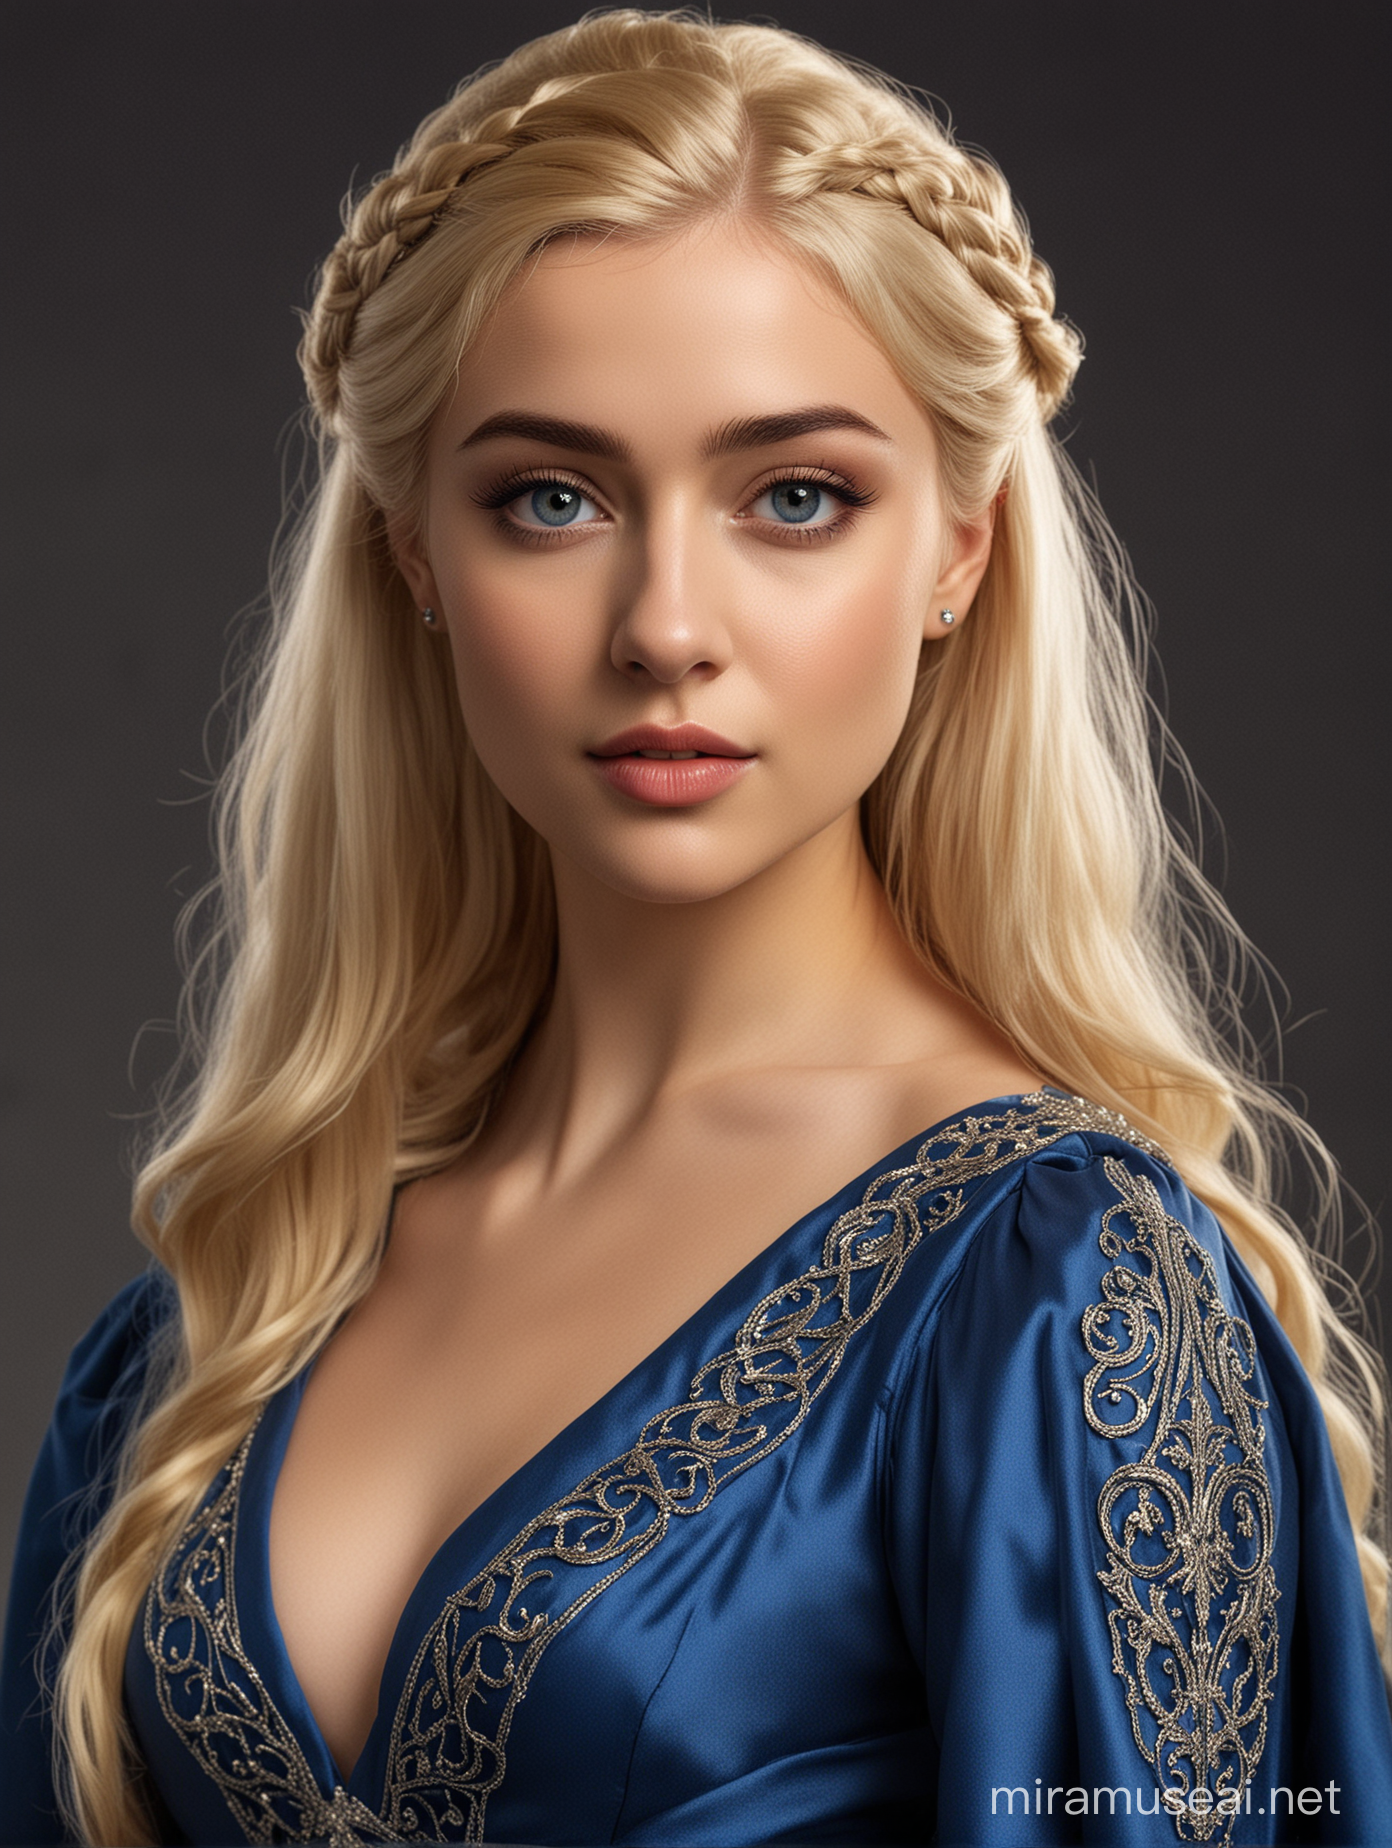 Elegant Valyrian Woman in Traditional Blue Gown